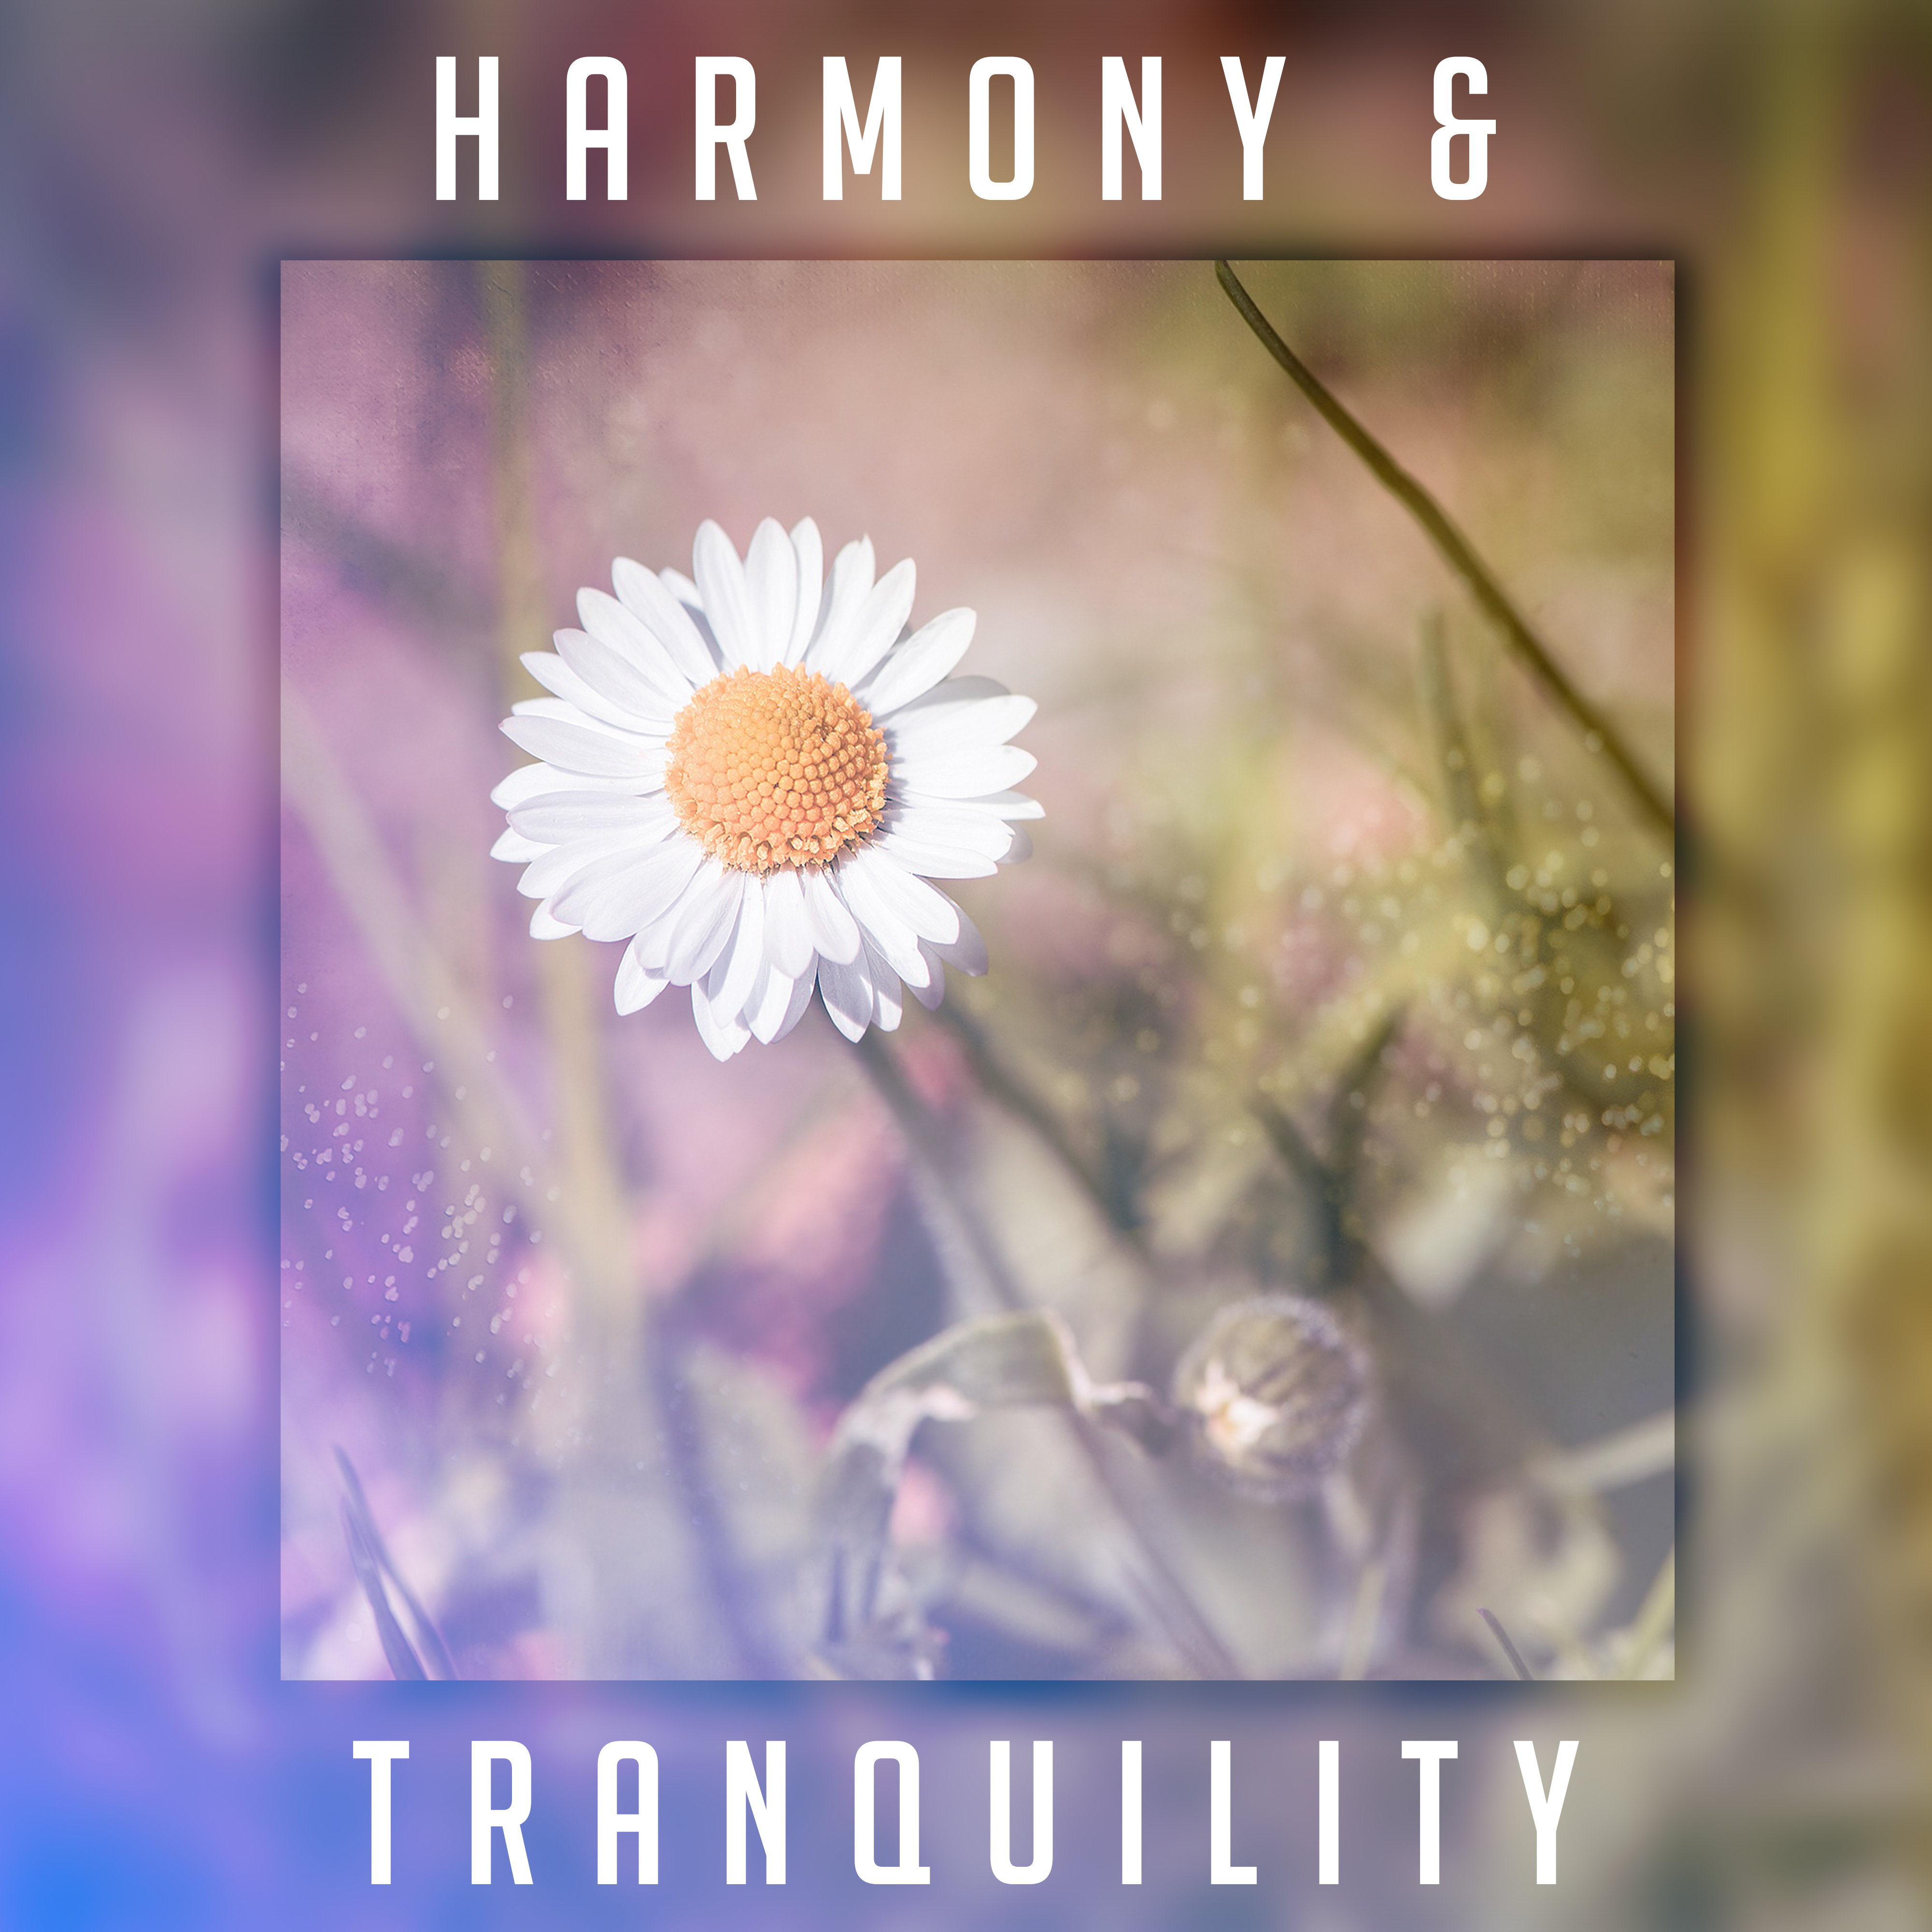 Harmony & Tranquility – Peaceful Music for Relaxation, Healing, Sounds of Water, Relaxing Waves, Inner Calmness, Pure Sleep, Calm Mind, Nature Sounds